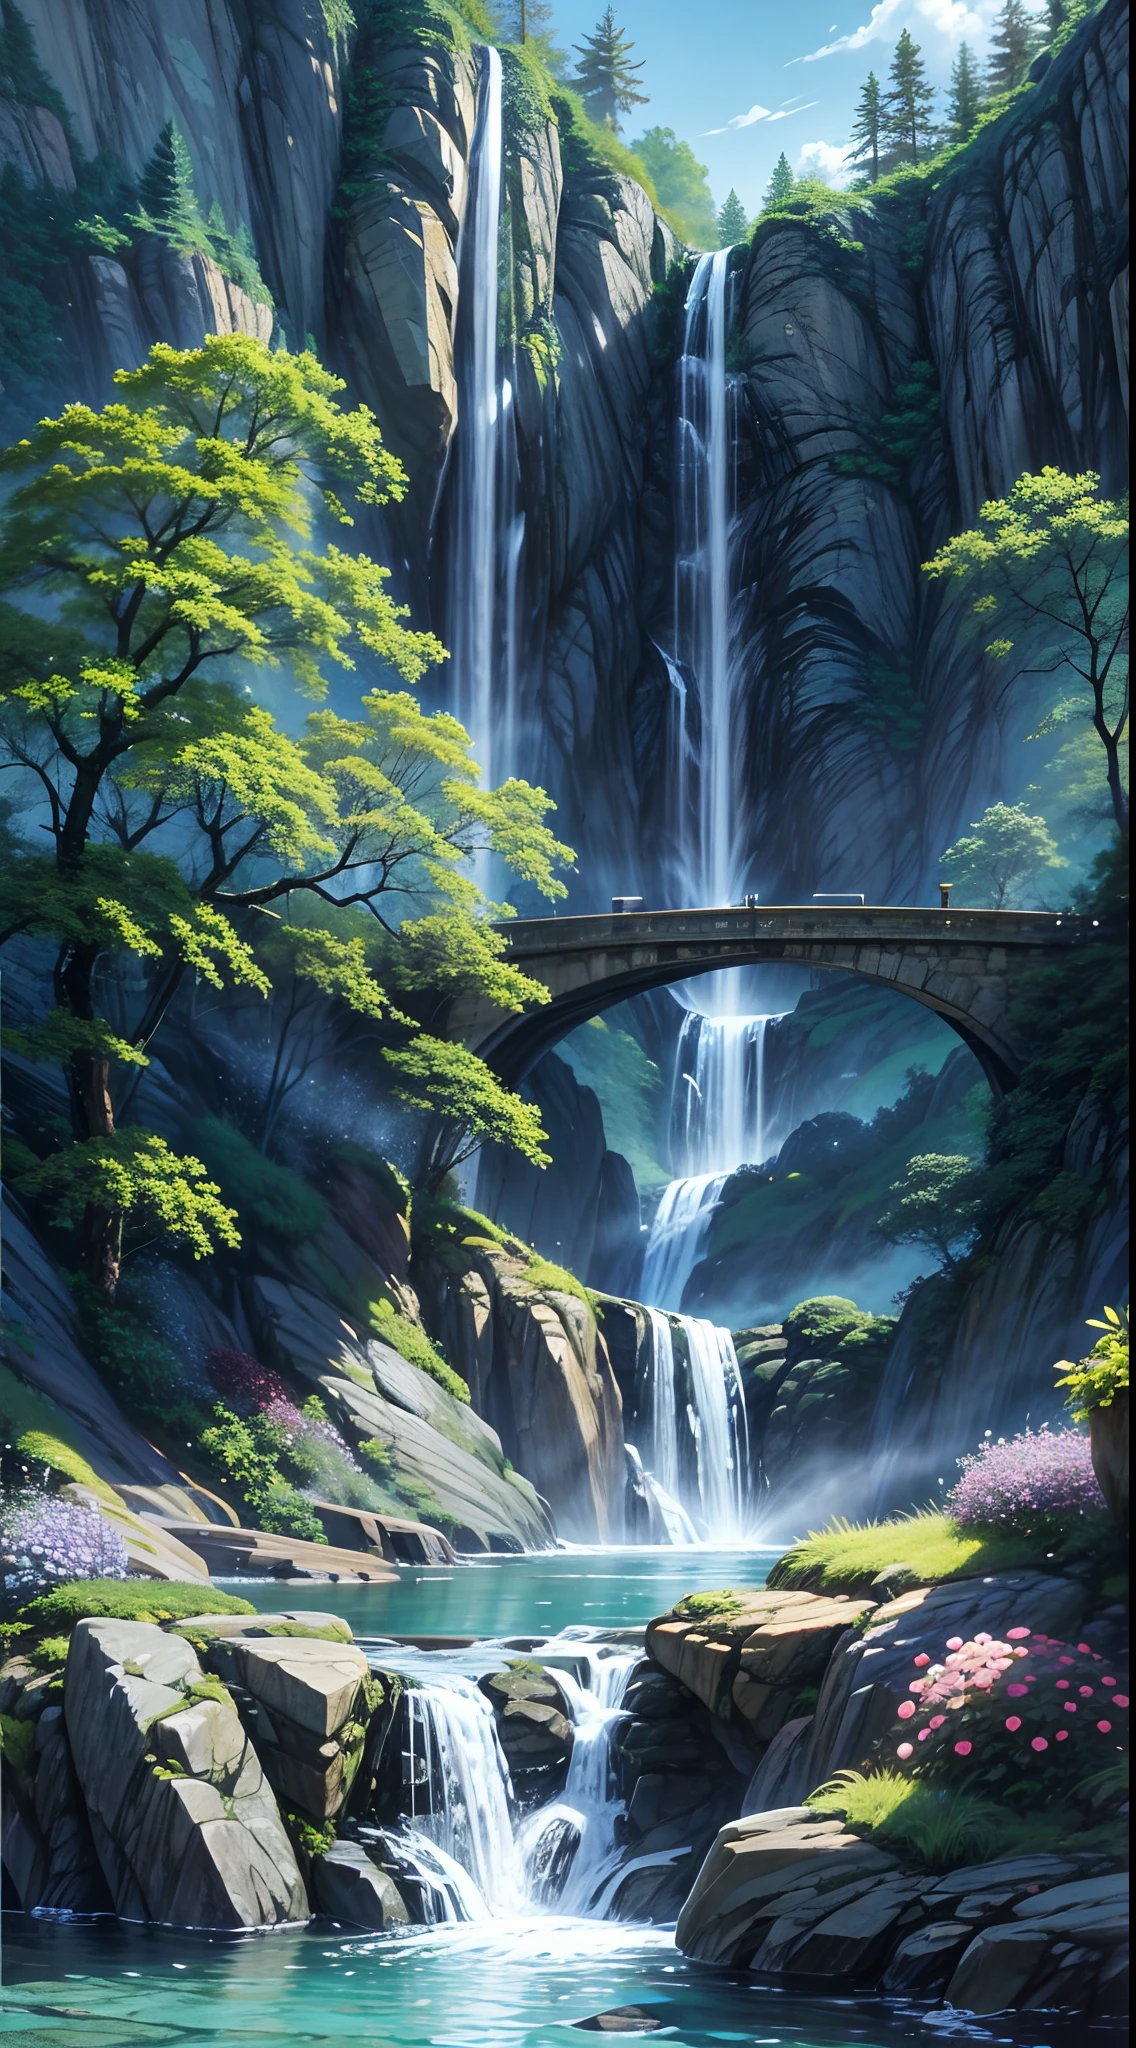 waterfallr，rivulets，stone，High hills，flowingwater，Flowers and trees，Epic composition，tmasterpiece